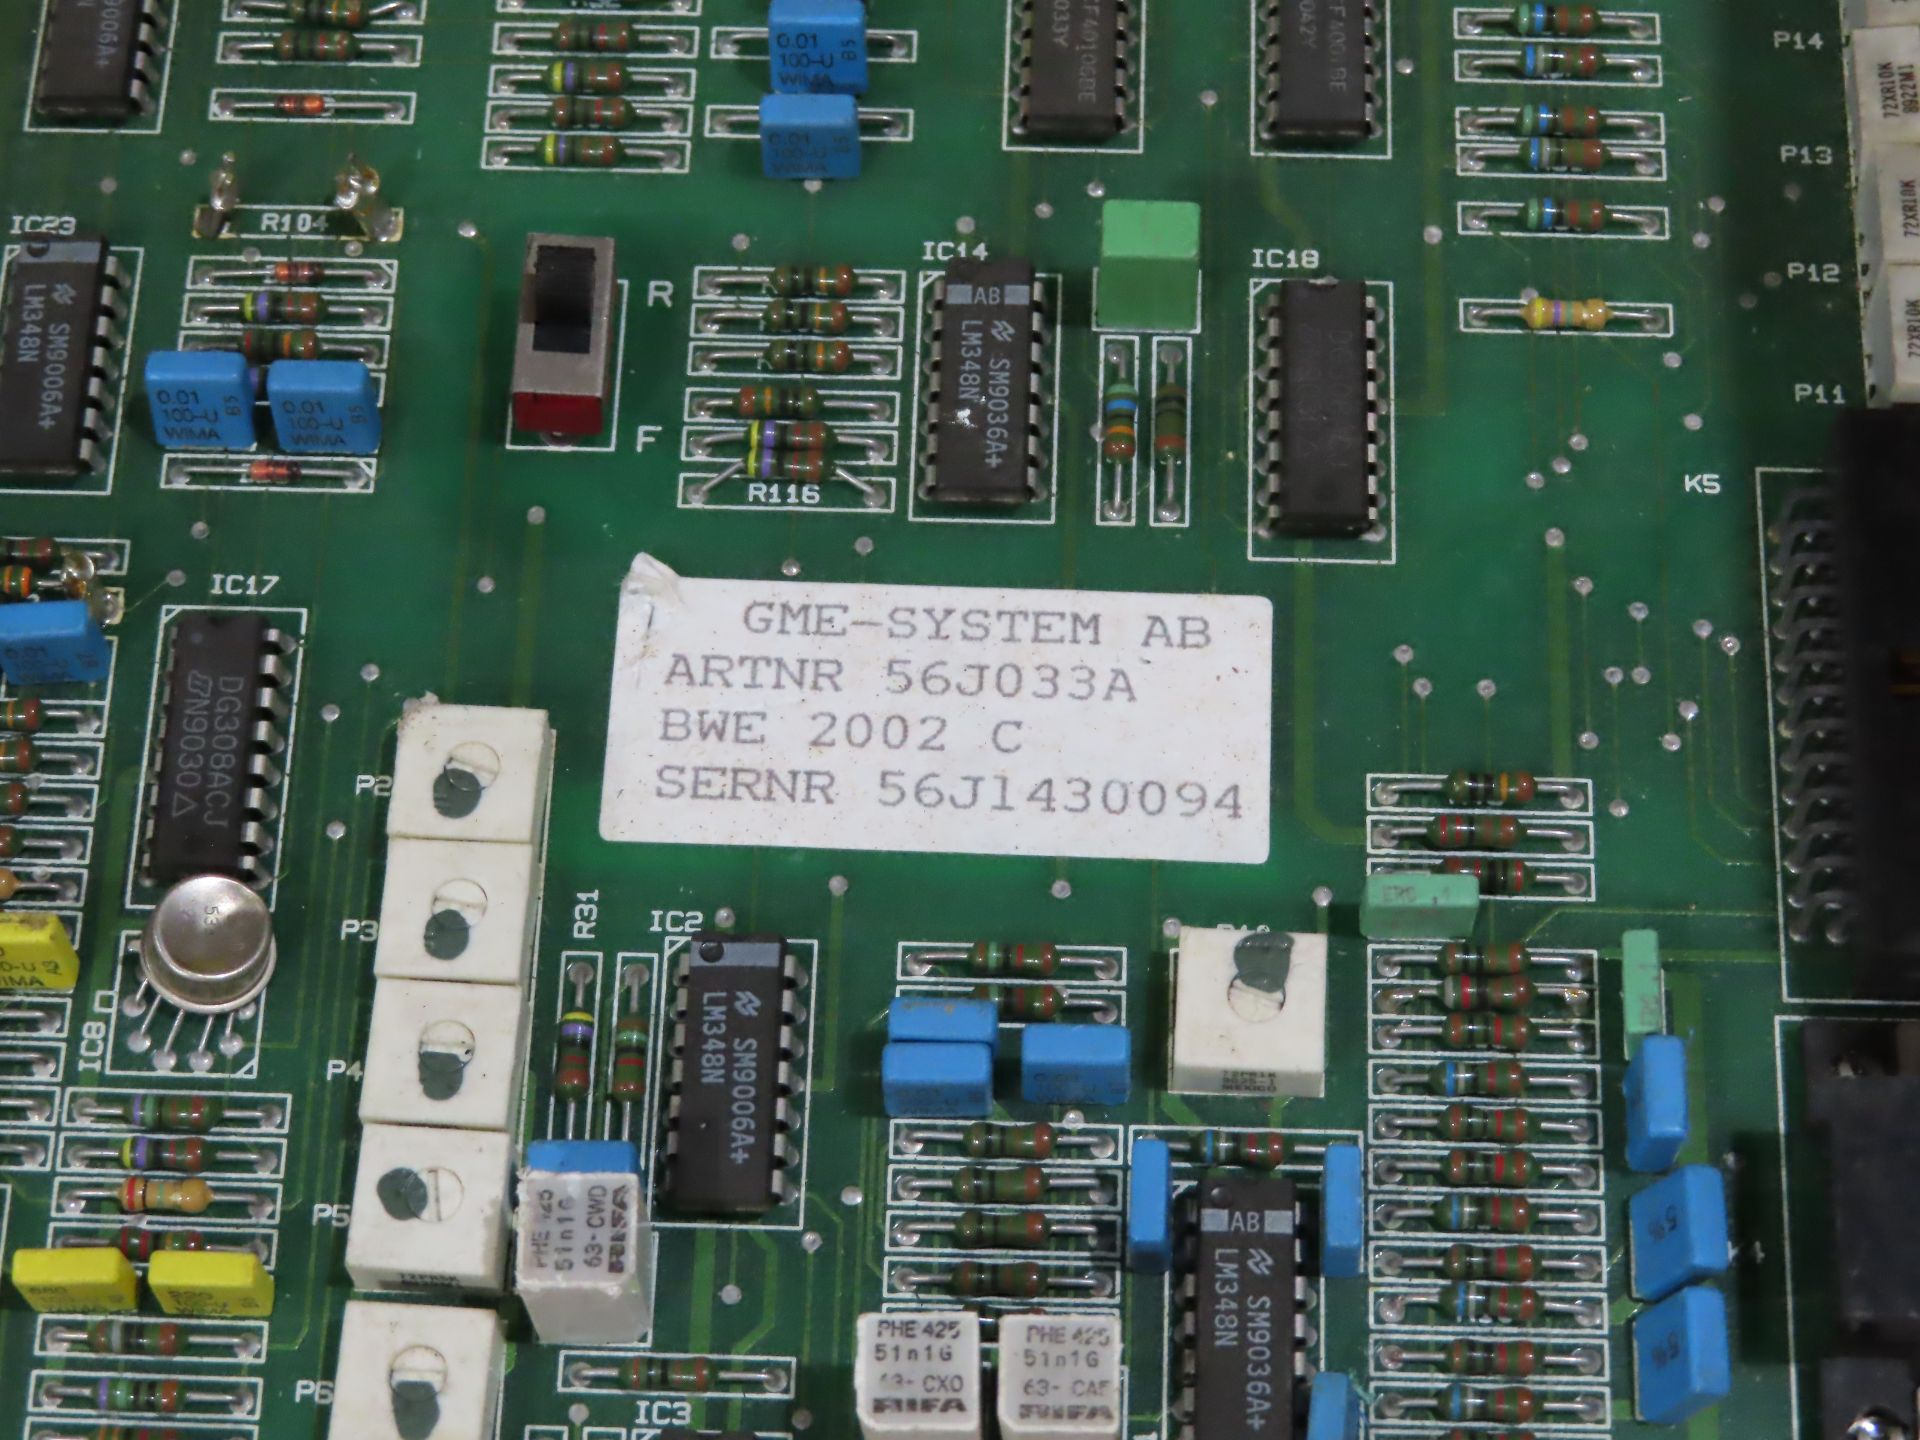 Qty 3 Altas Copco model 56J033A control boards, as always, with Brolyn LLC auctions, all lots can be - Image 2 of 2